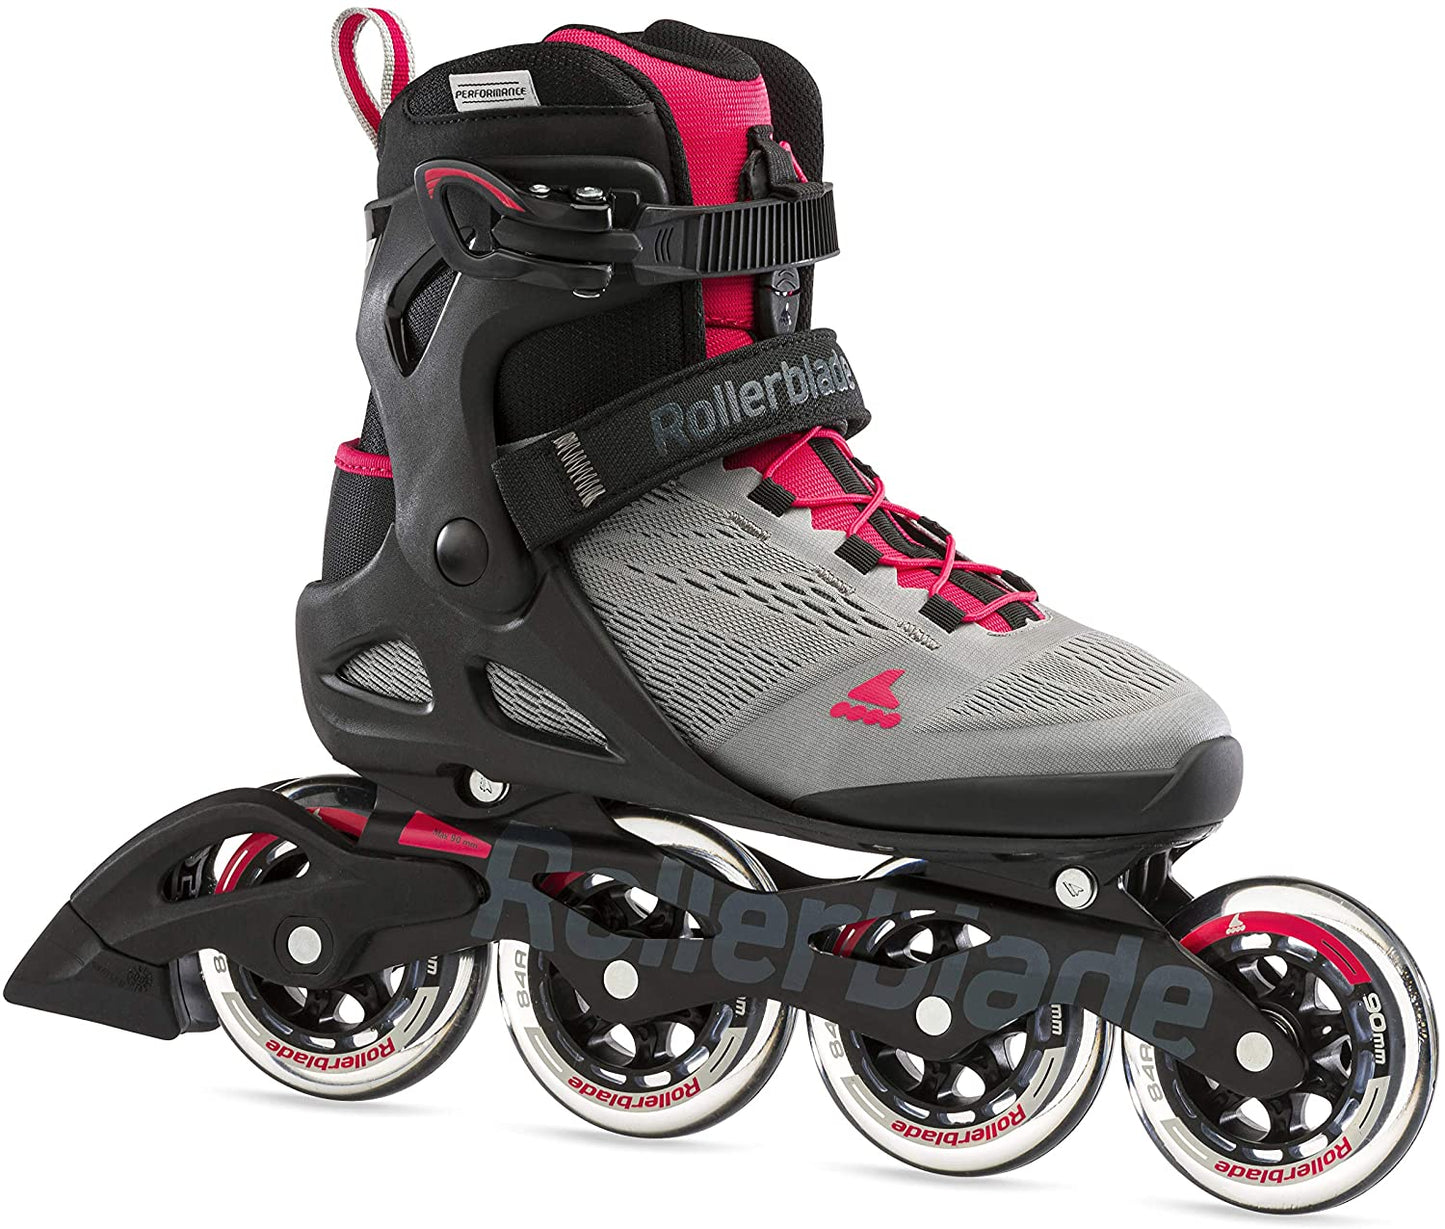 Rollerblade Macroblade 90 Womens Neutral Grey/Paradise Pink 7.5 - Open Box  - (Without Original Box)